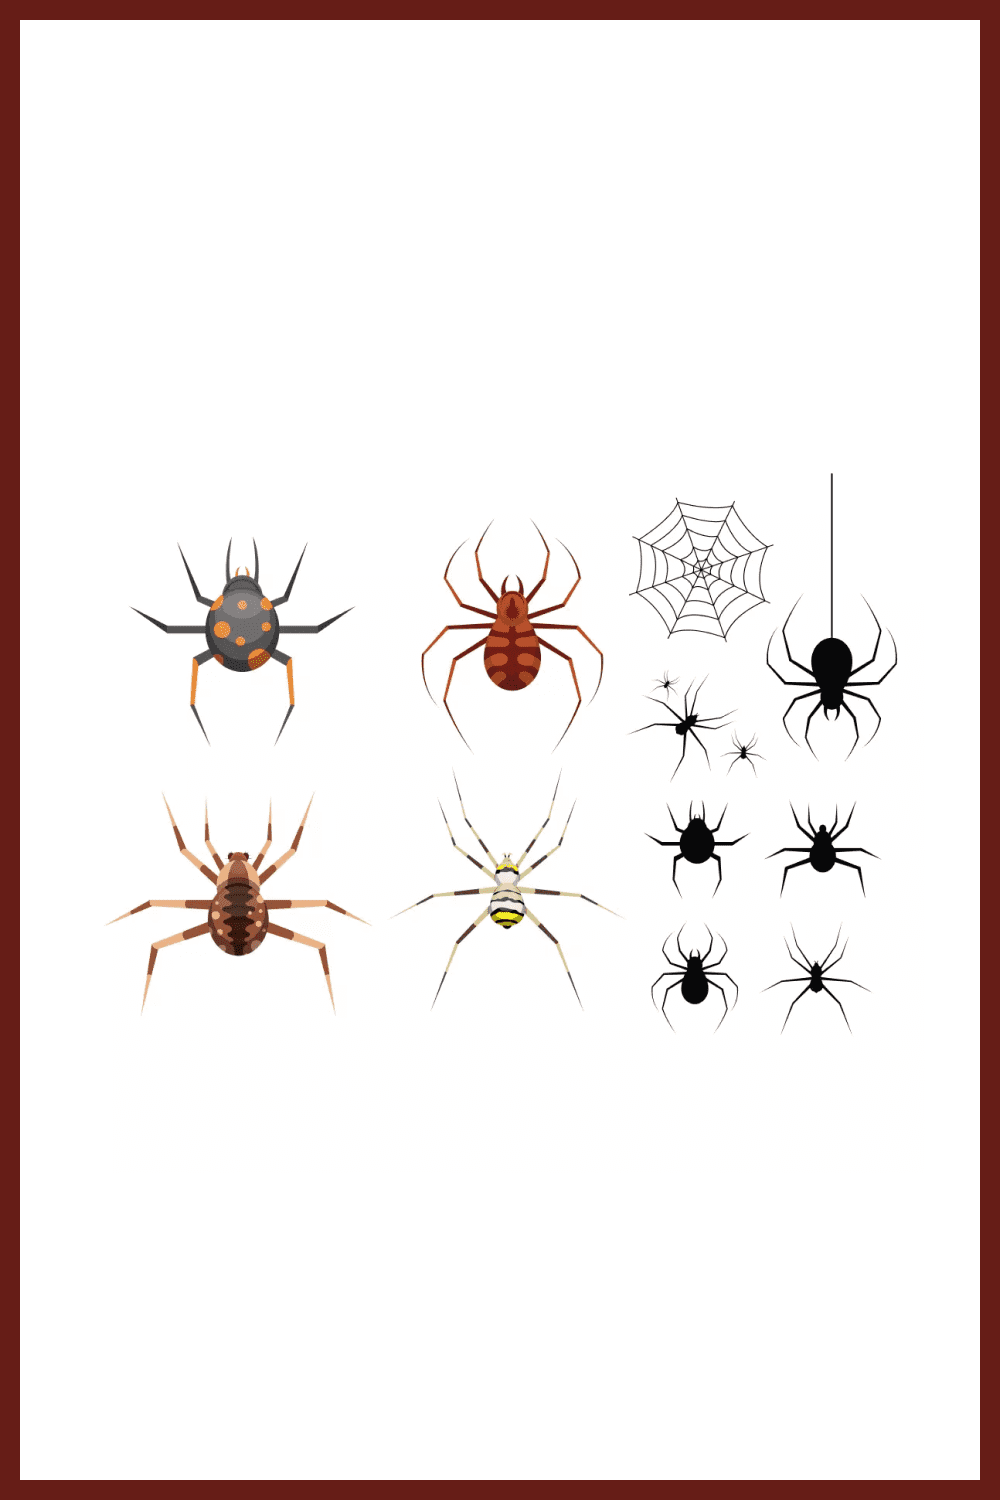 Collage of images of various spiders.